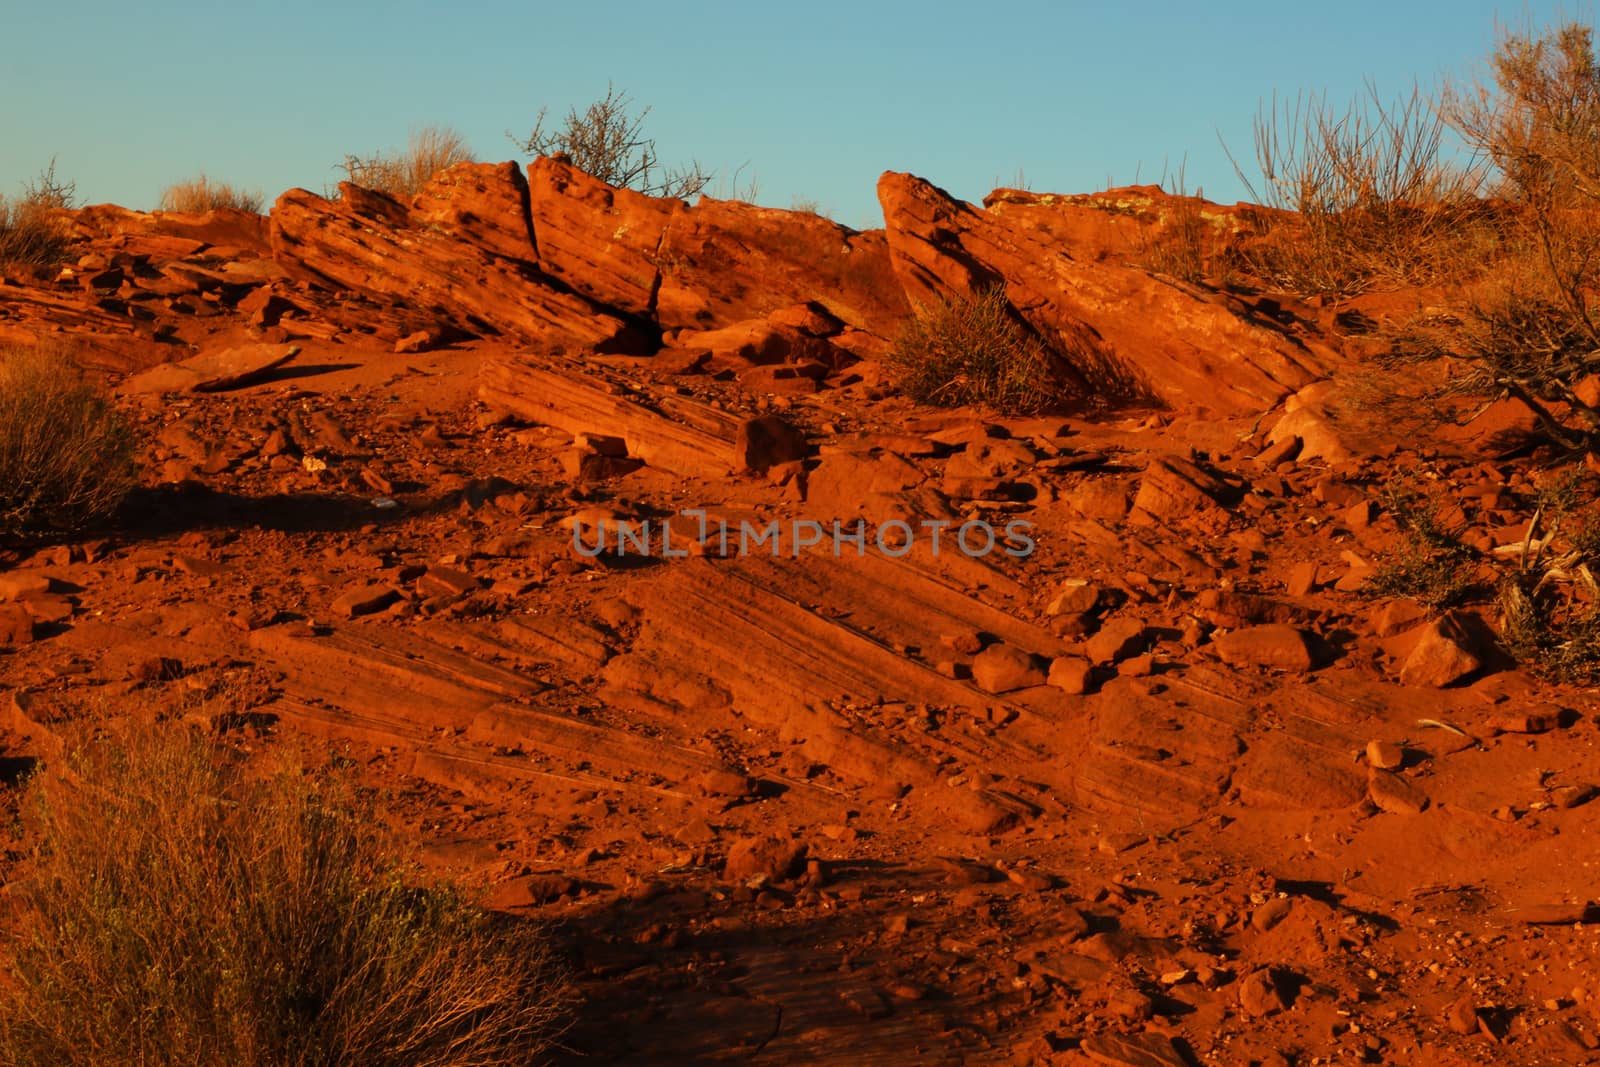 Sandstone desert landscape Arizona. Photo taken at the Horseshoe Bend National Park. The texture of the sand and stone creates color palette in the desert